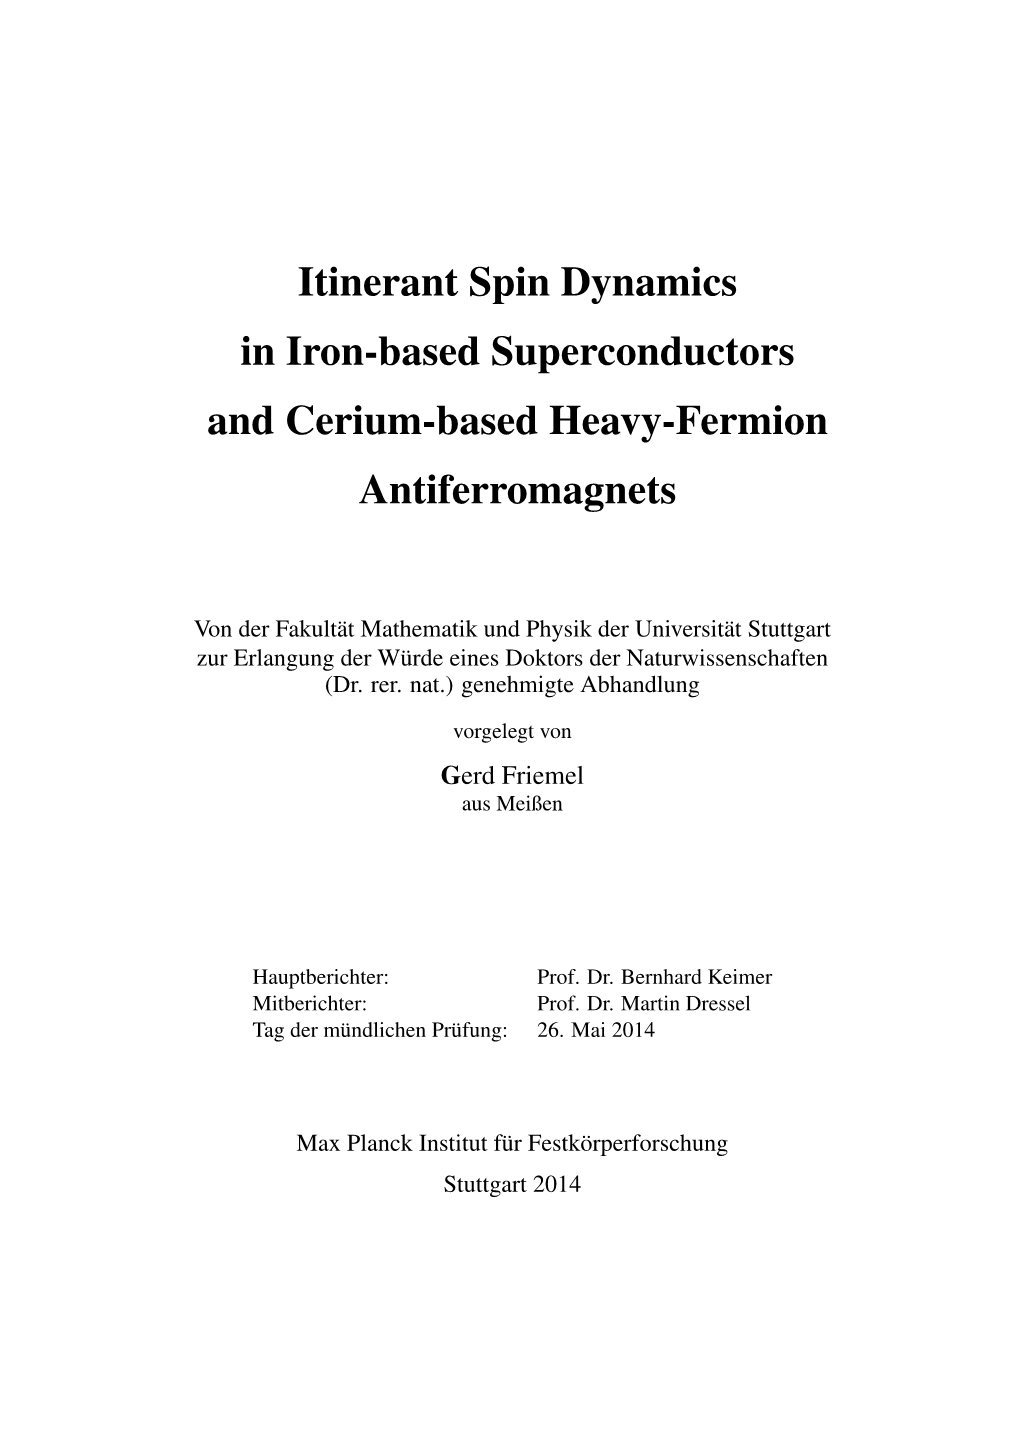 Itinerant Spin Dynamics in Iron-Based Superconductors and Cerium-Based Heavy-Fermion Antiferromagnets